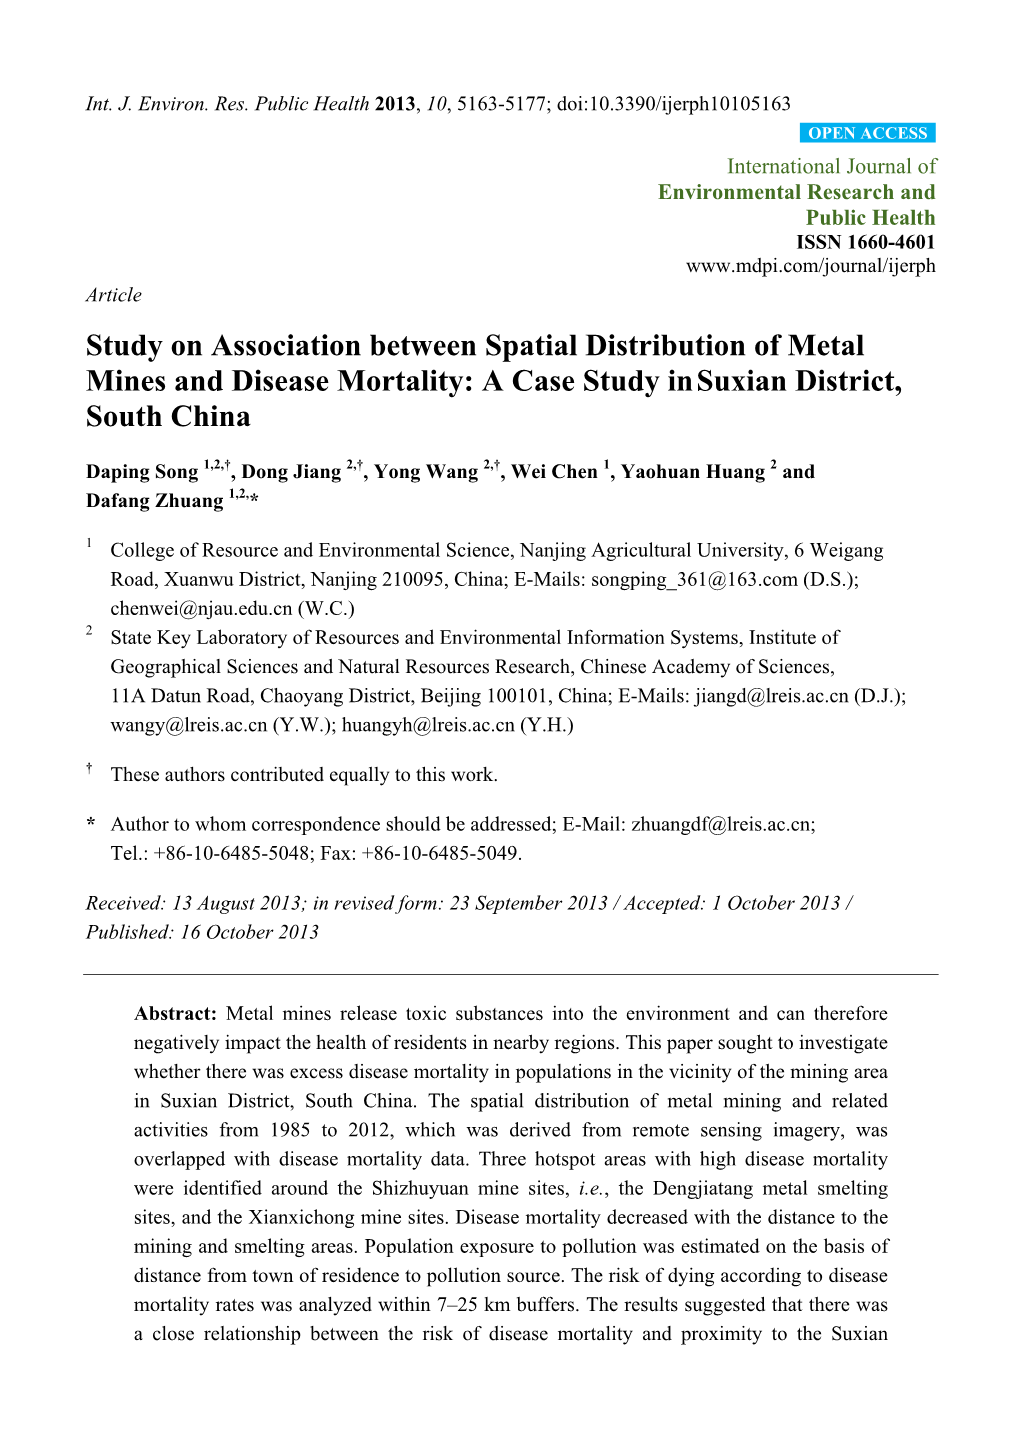 Study on Association Between Spatial Distribution of Metal